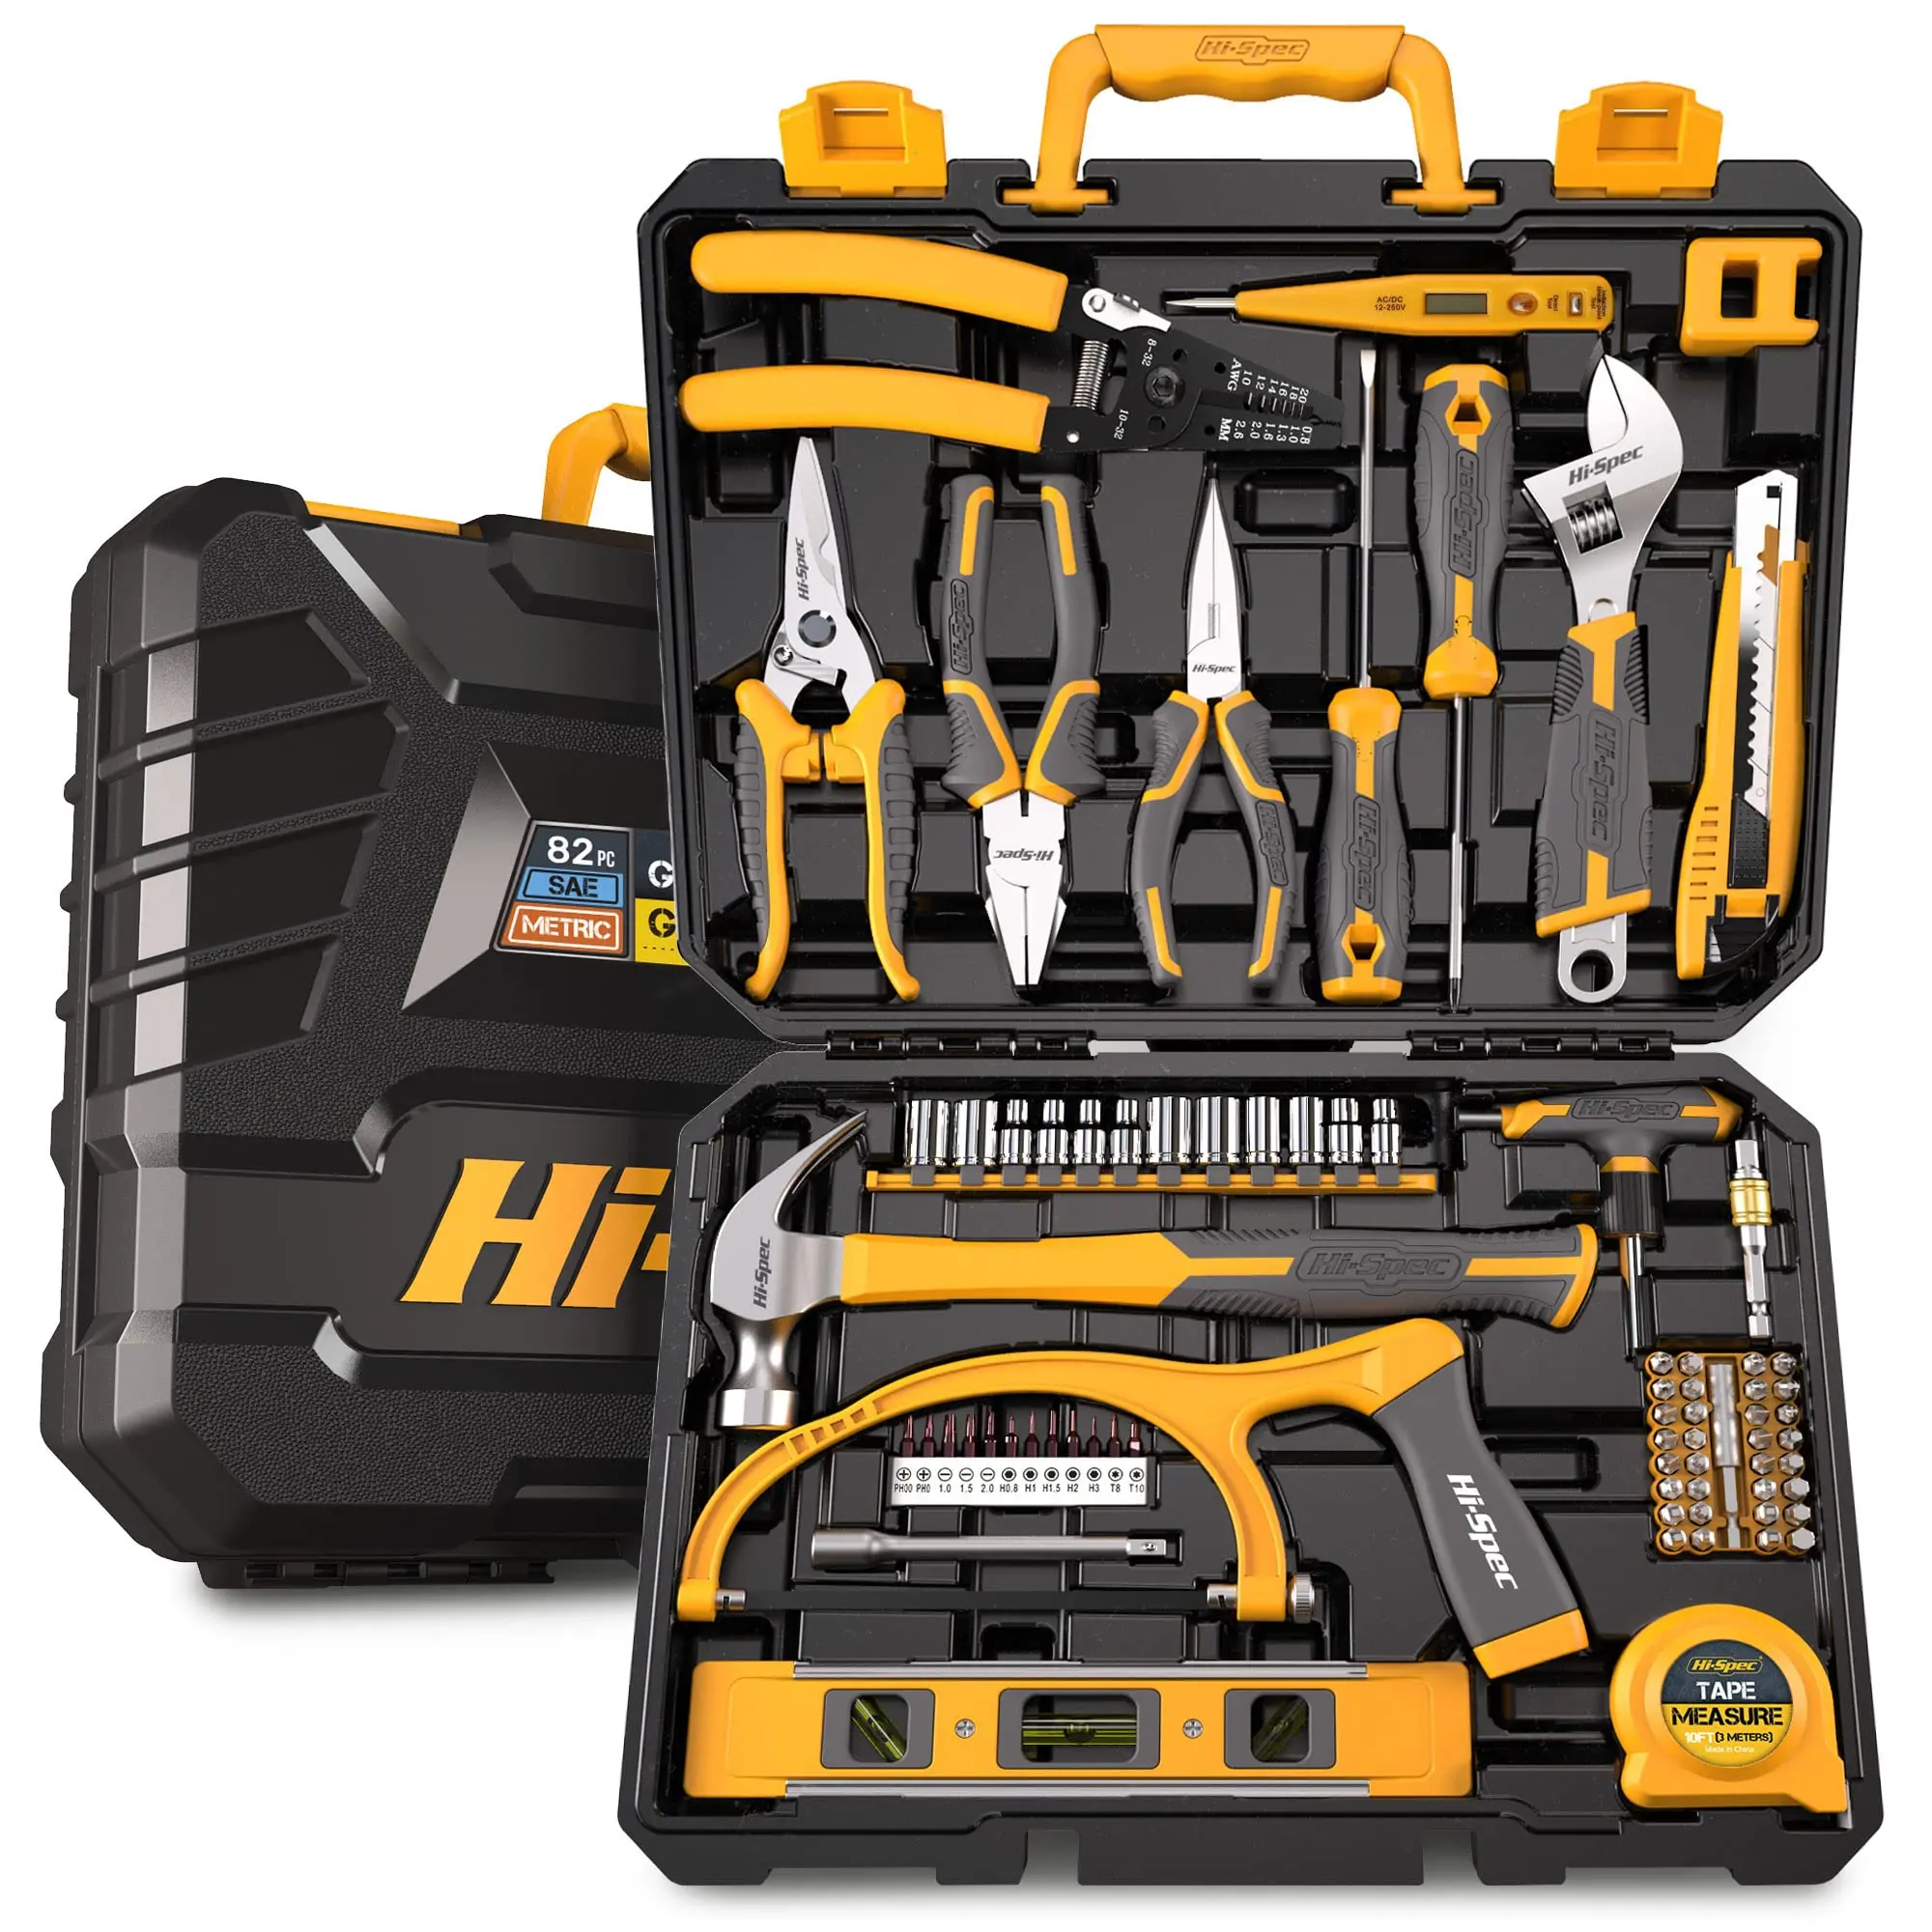 

New low price 82piece Home & Garage Mechanics Tool Kit Set. Complete Essential Hand Tools for DIY Repairs Metal Wall Plate